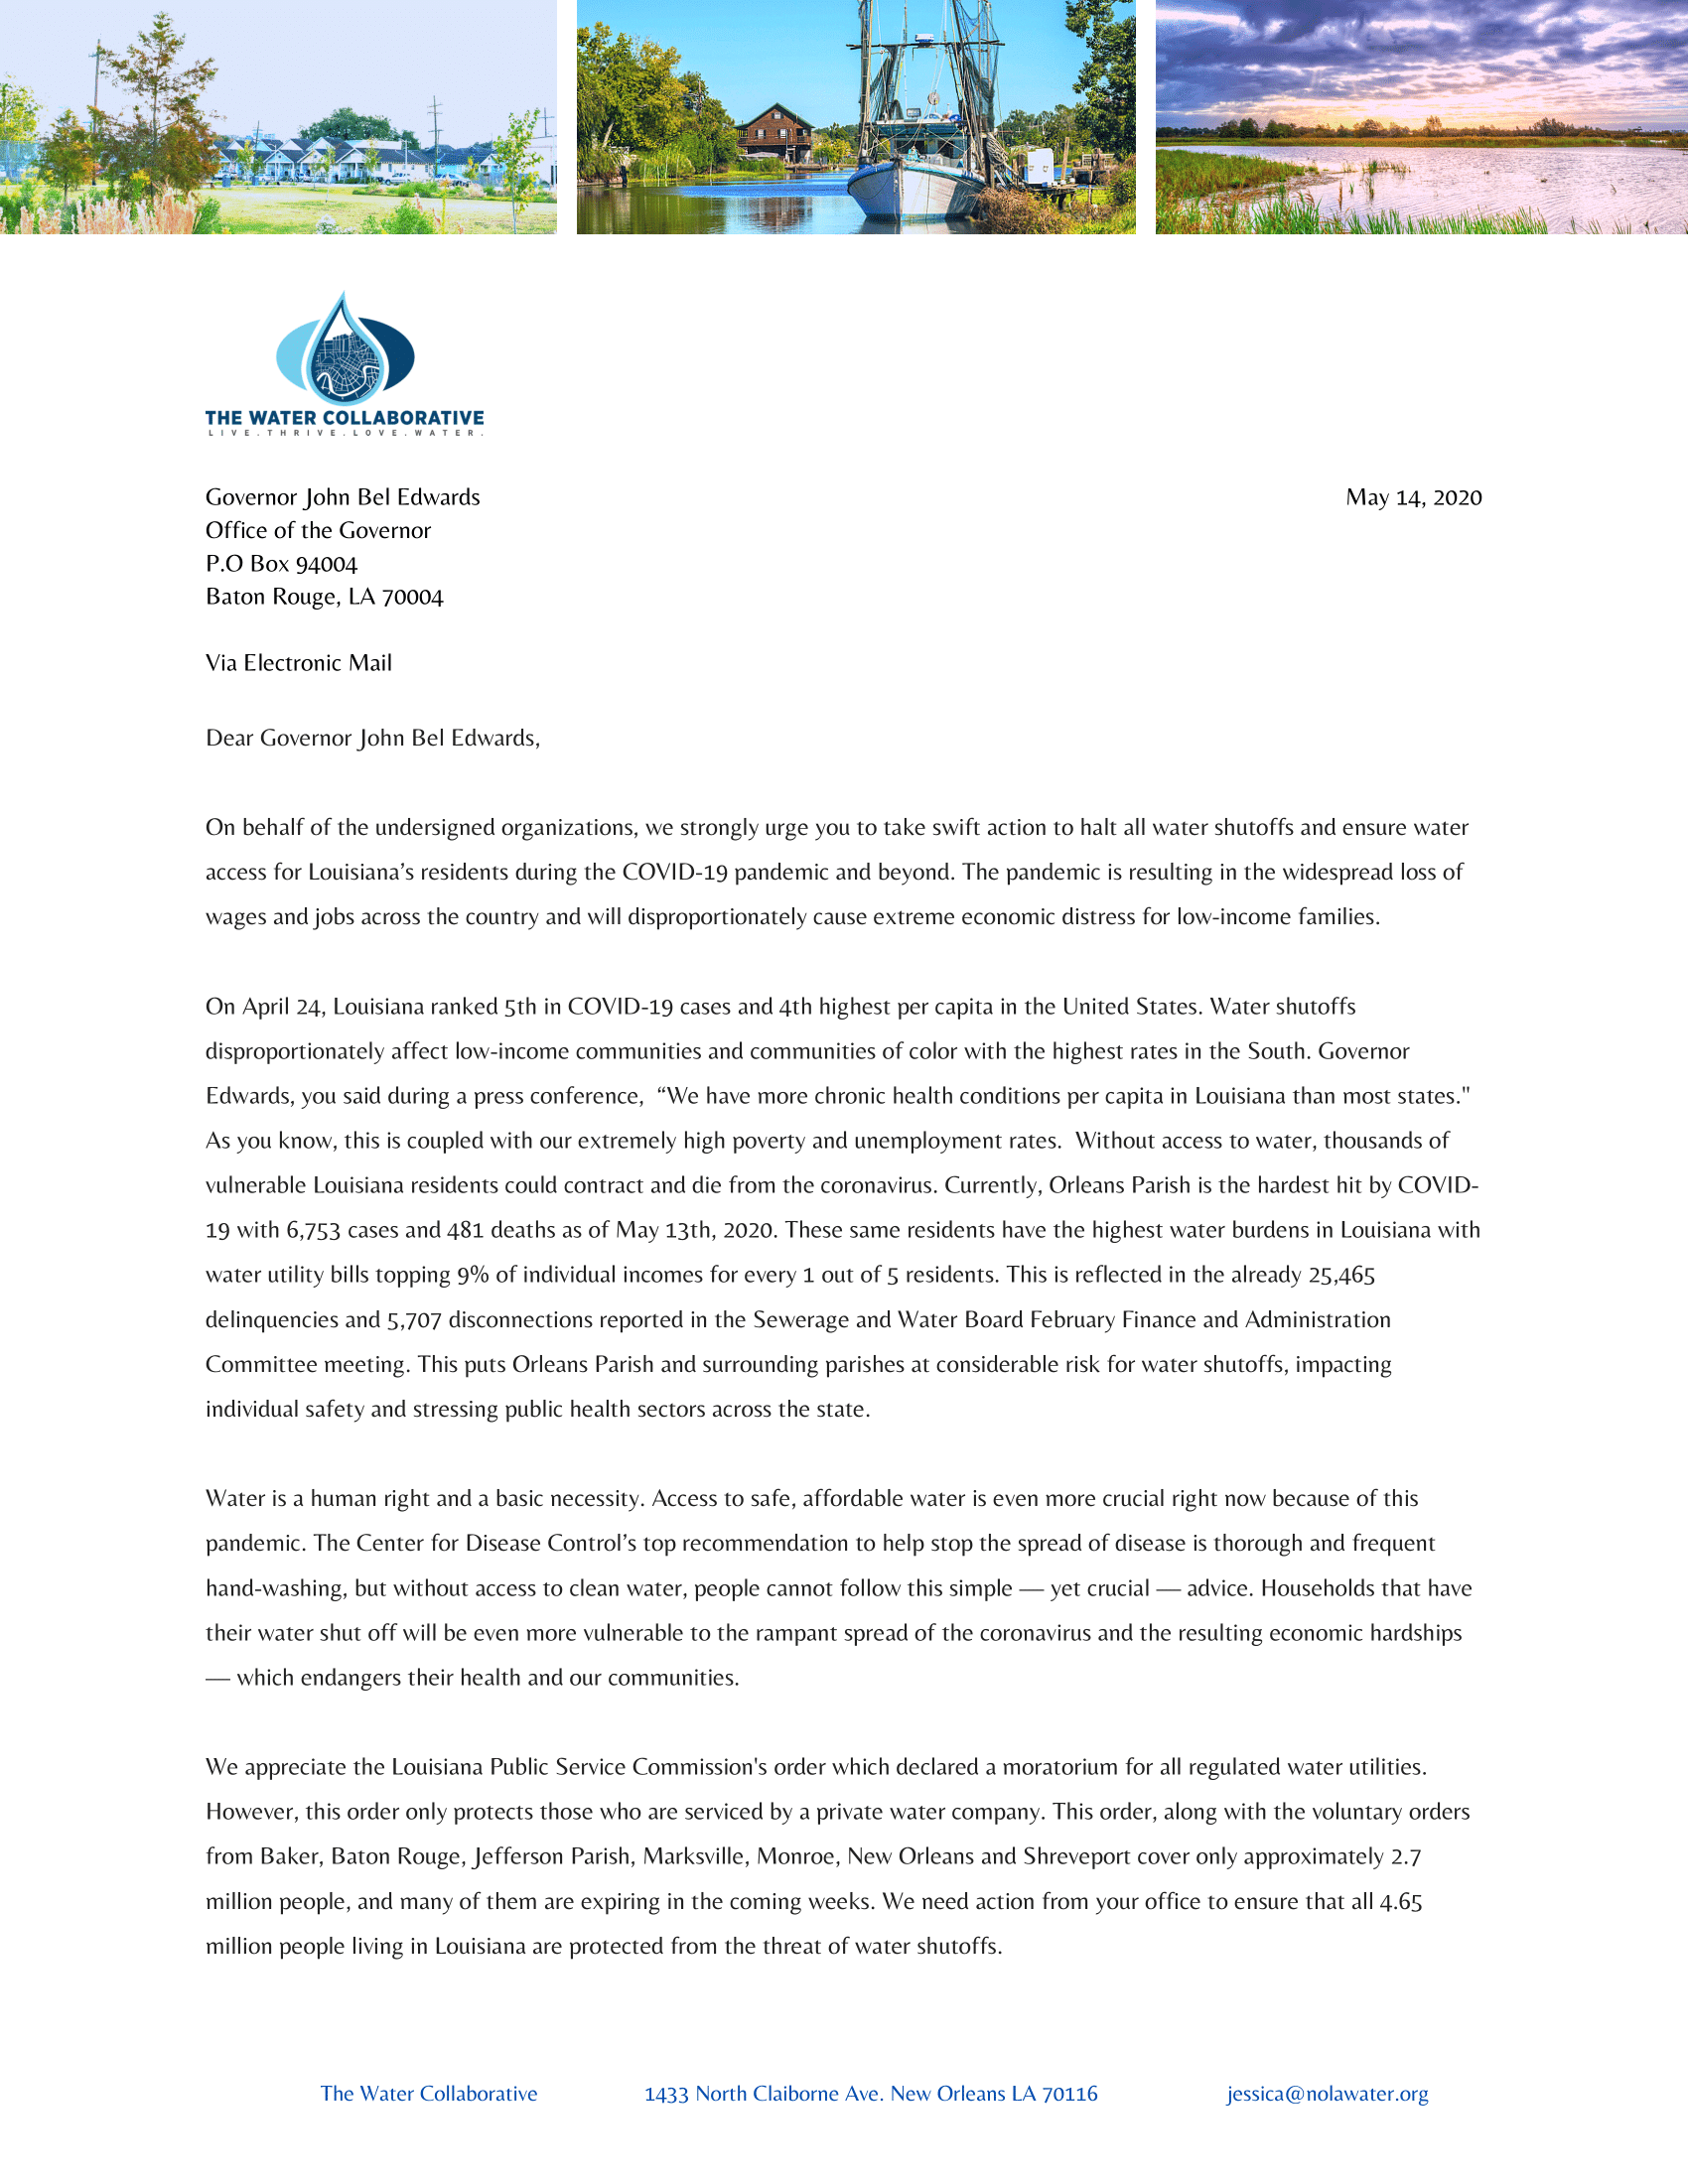 Letter+to+Governor+Edwards+May+2020+(1)-1.png